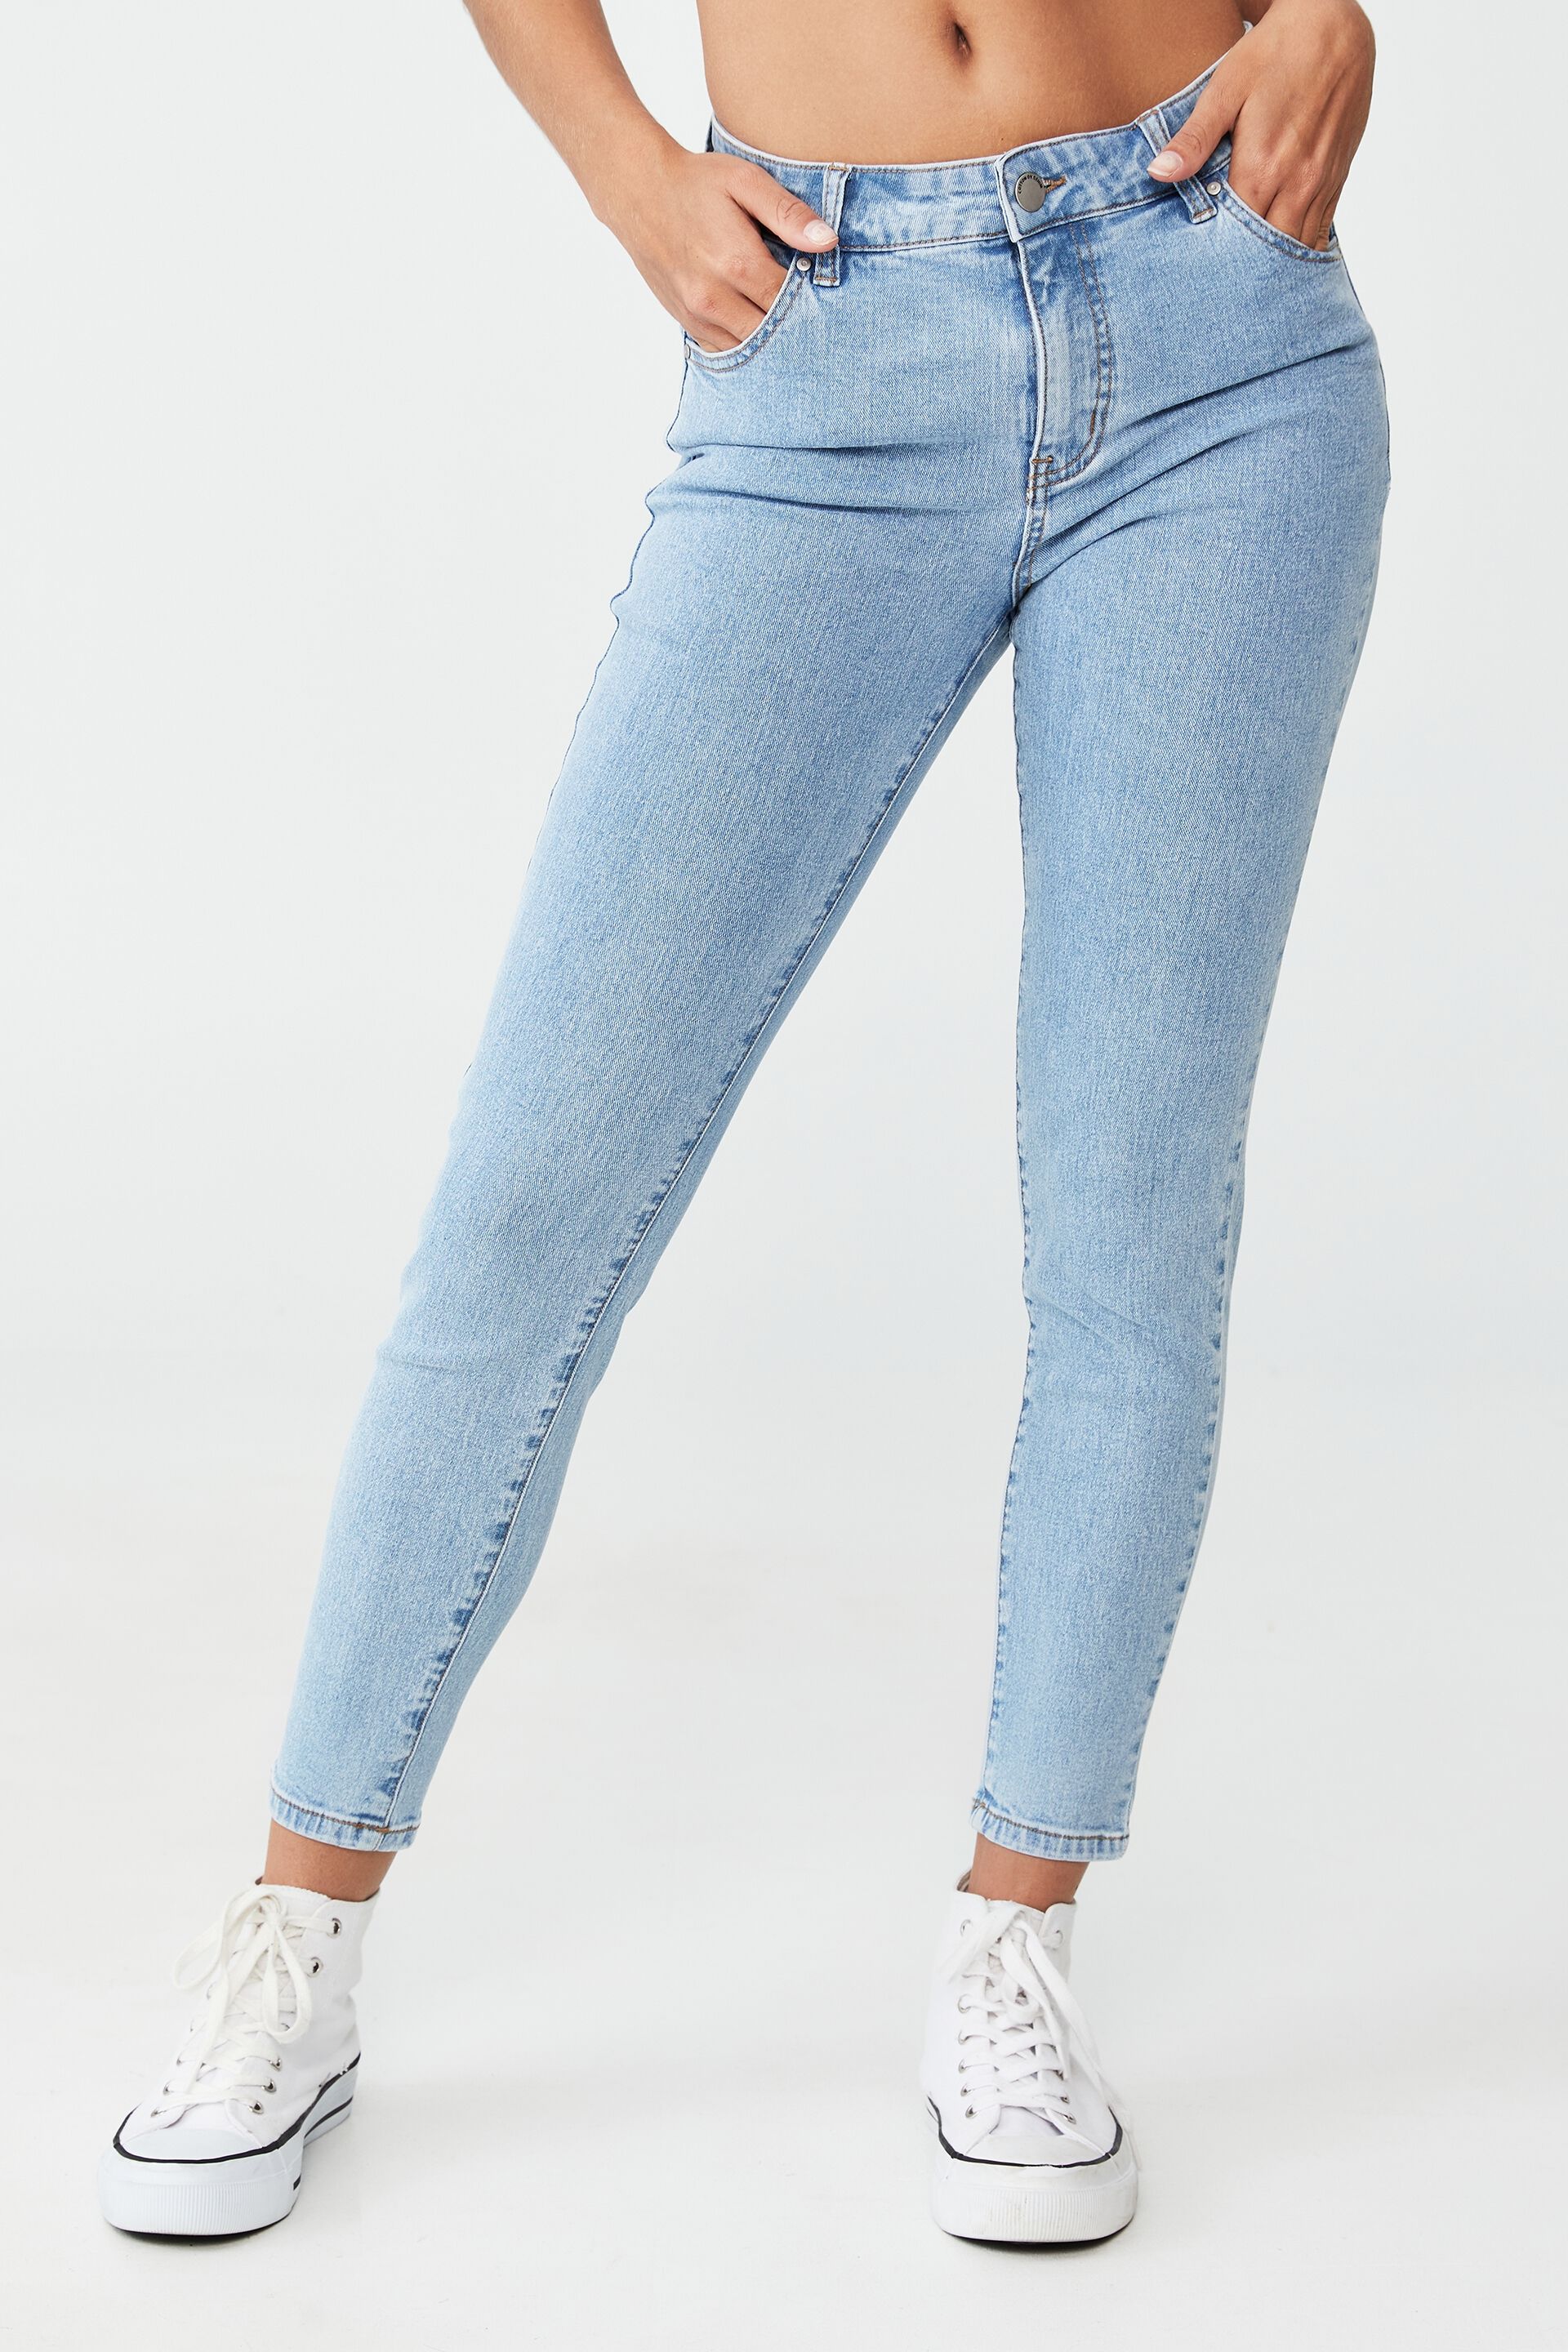 jeans for thin women